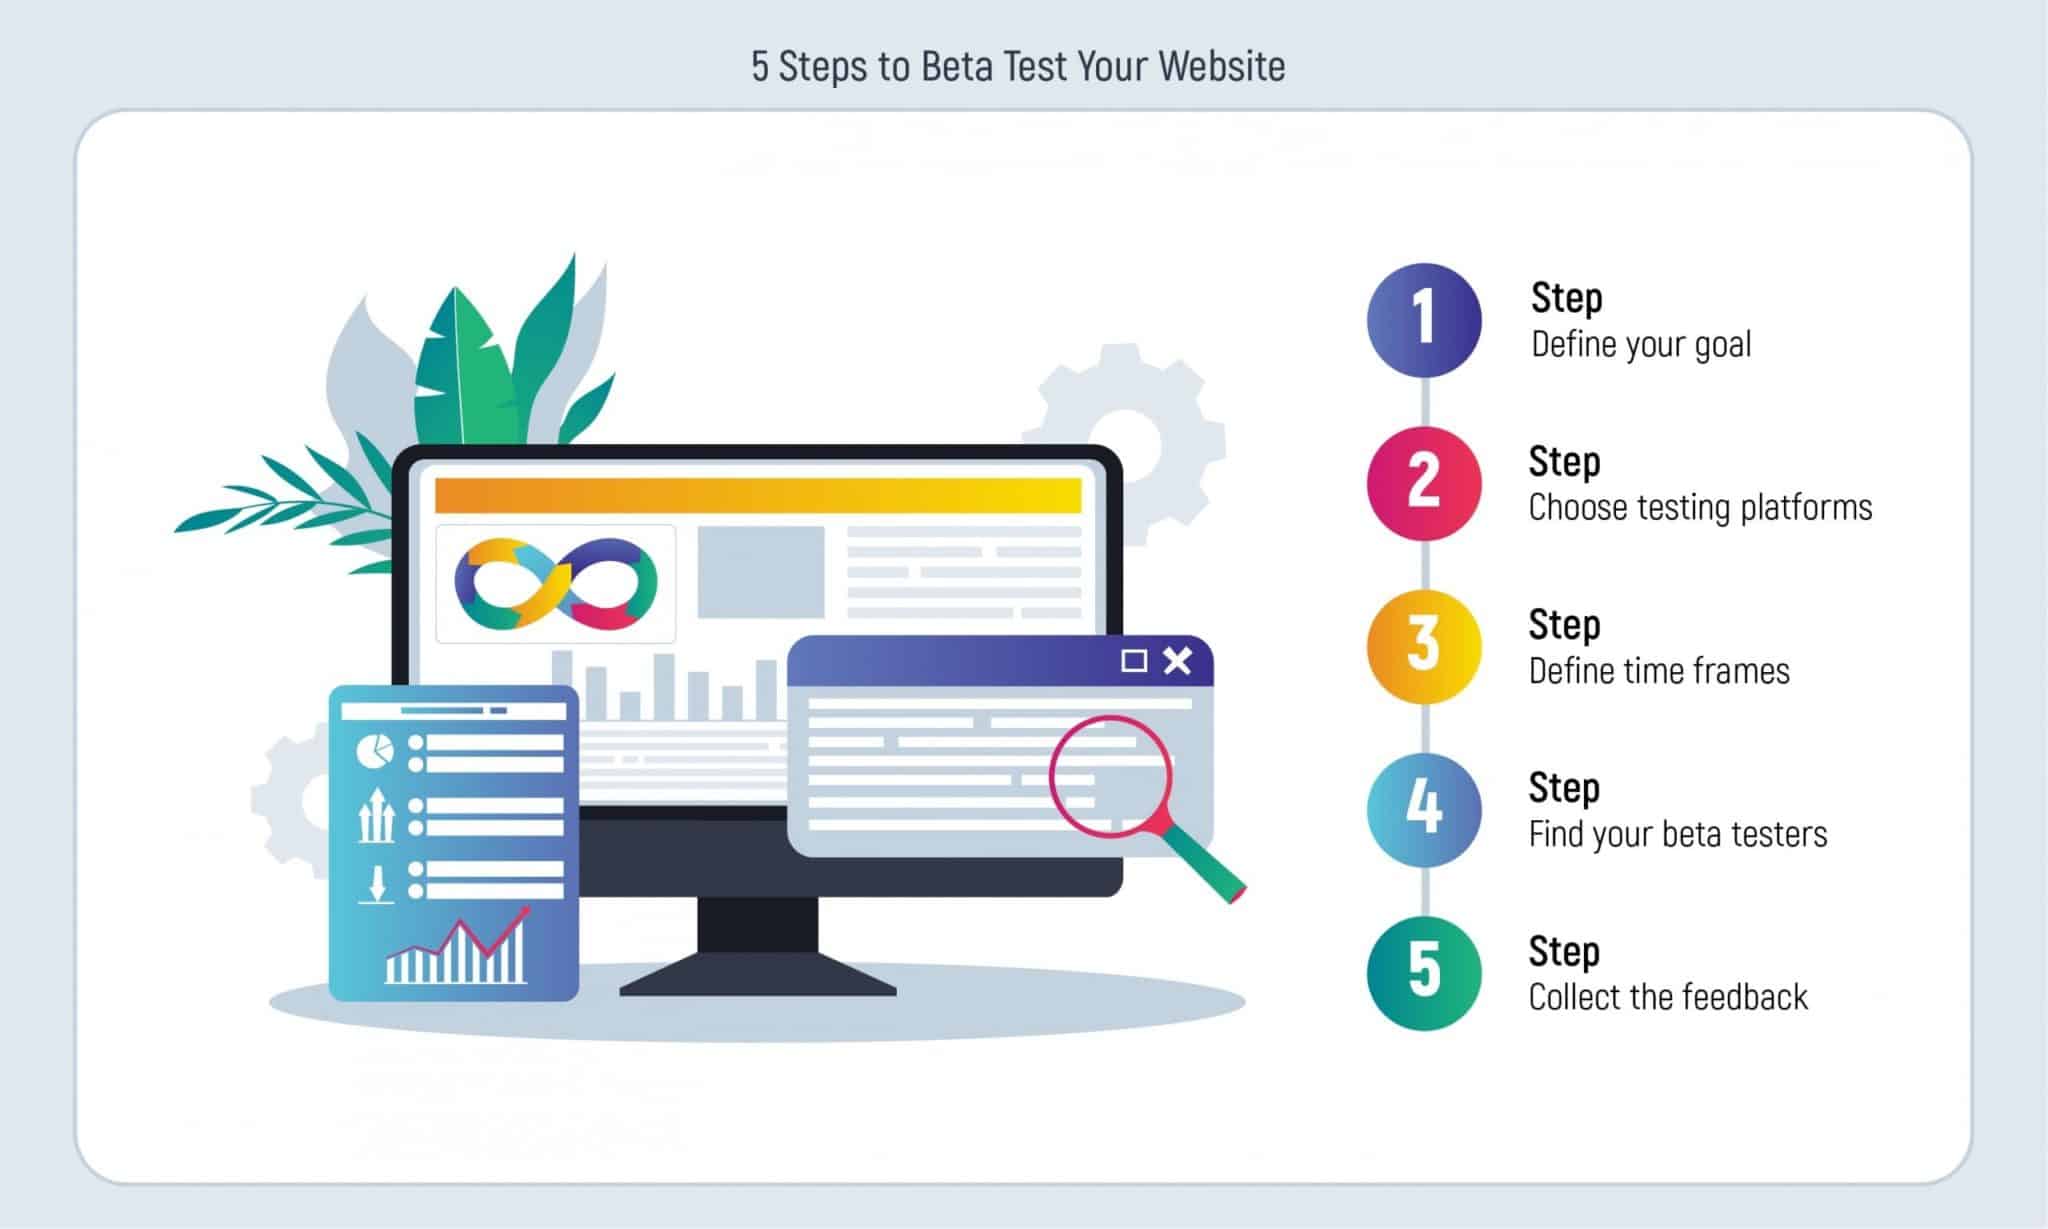 How to Test Your Website During the Website Beta Phase